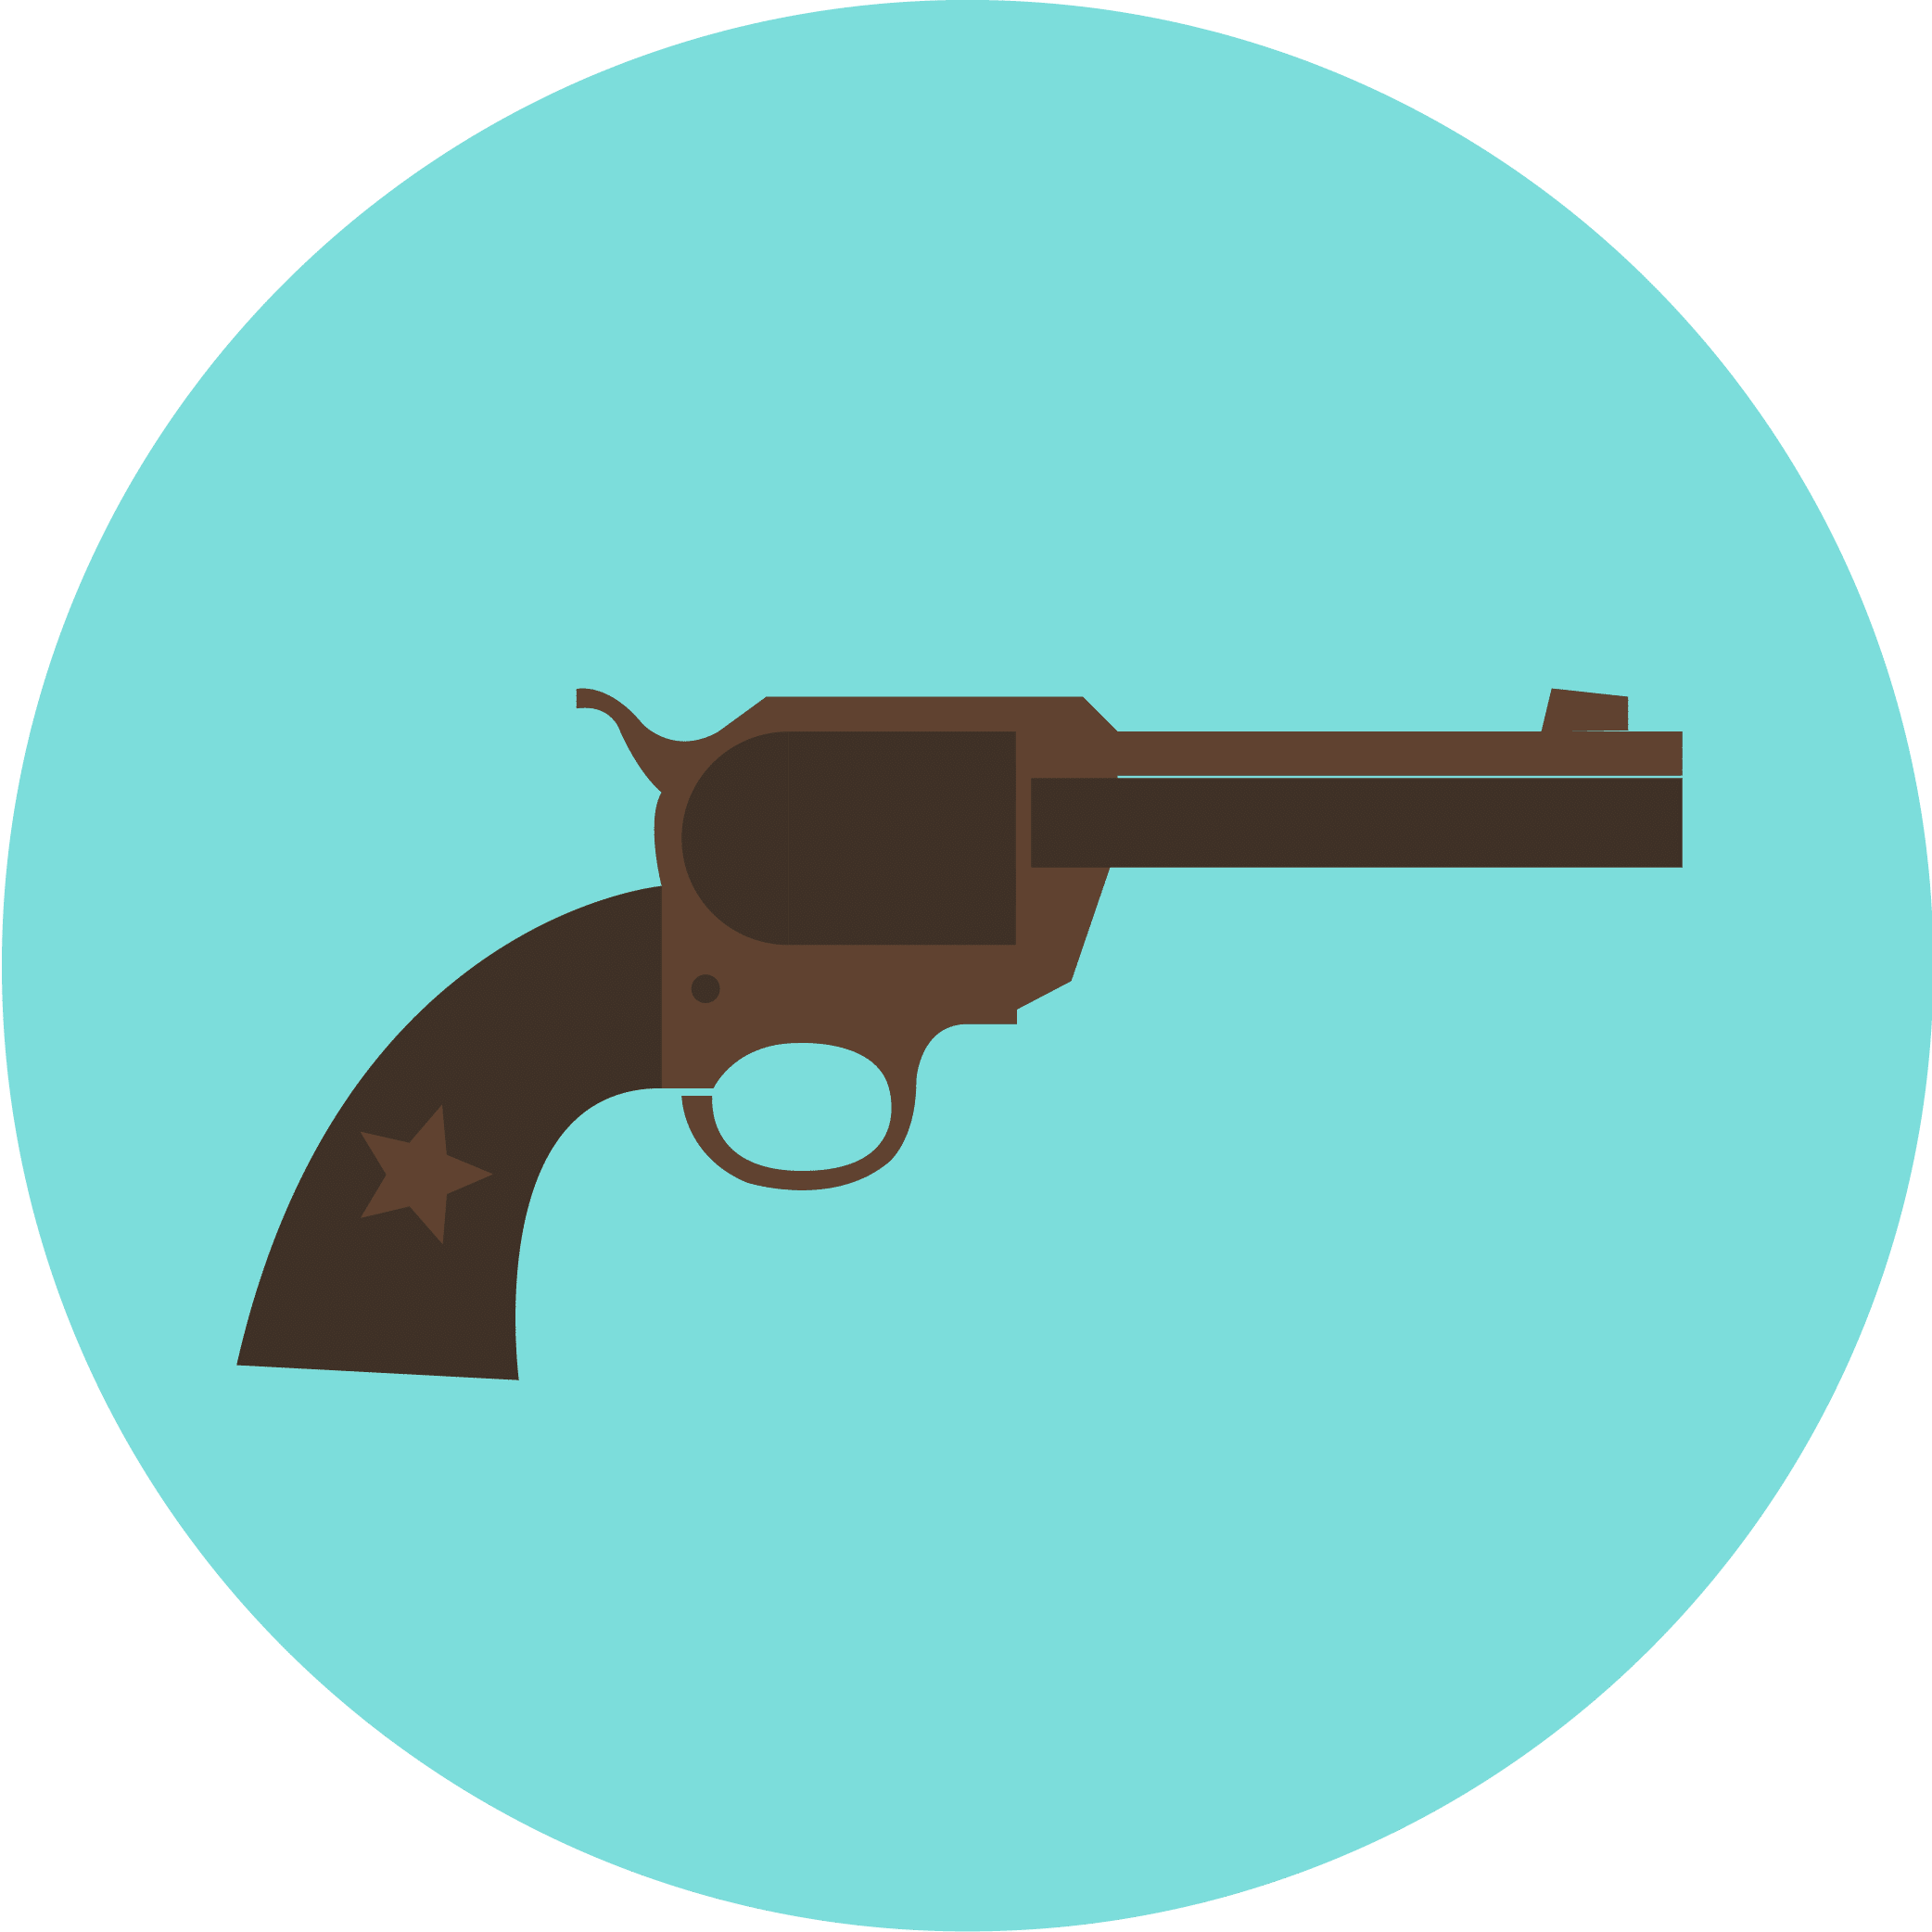 Illustration of an old-fashioned gun.